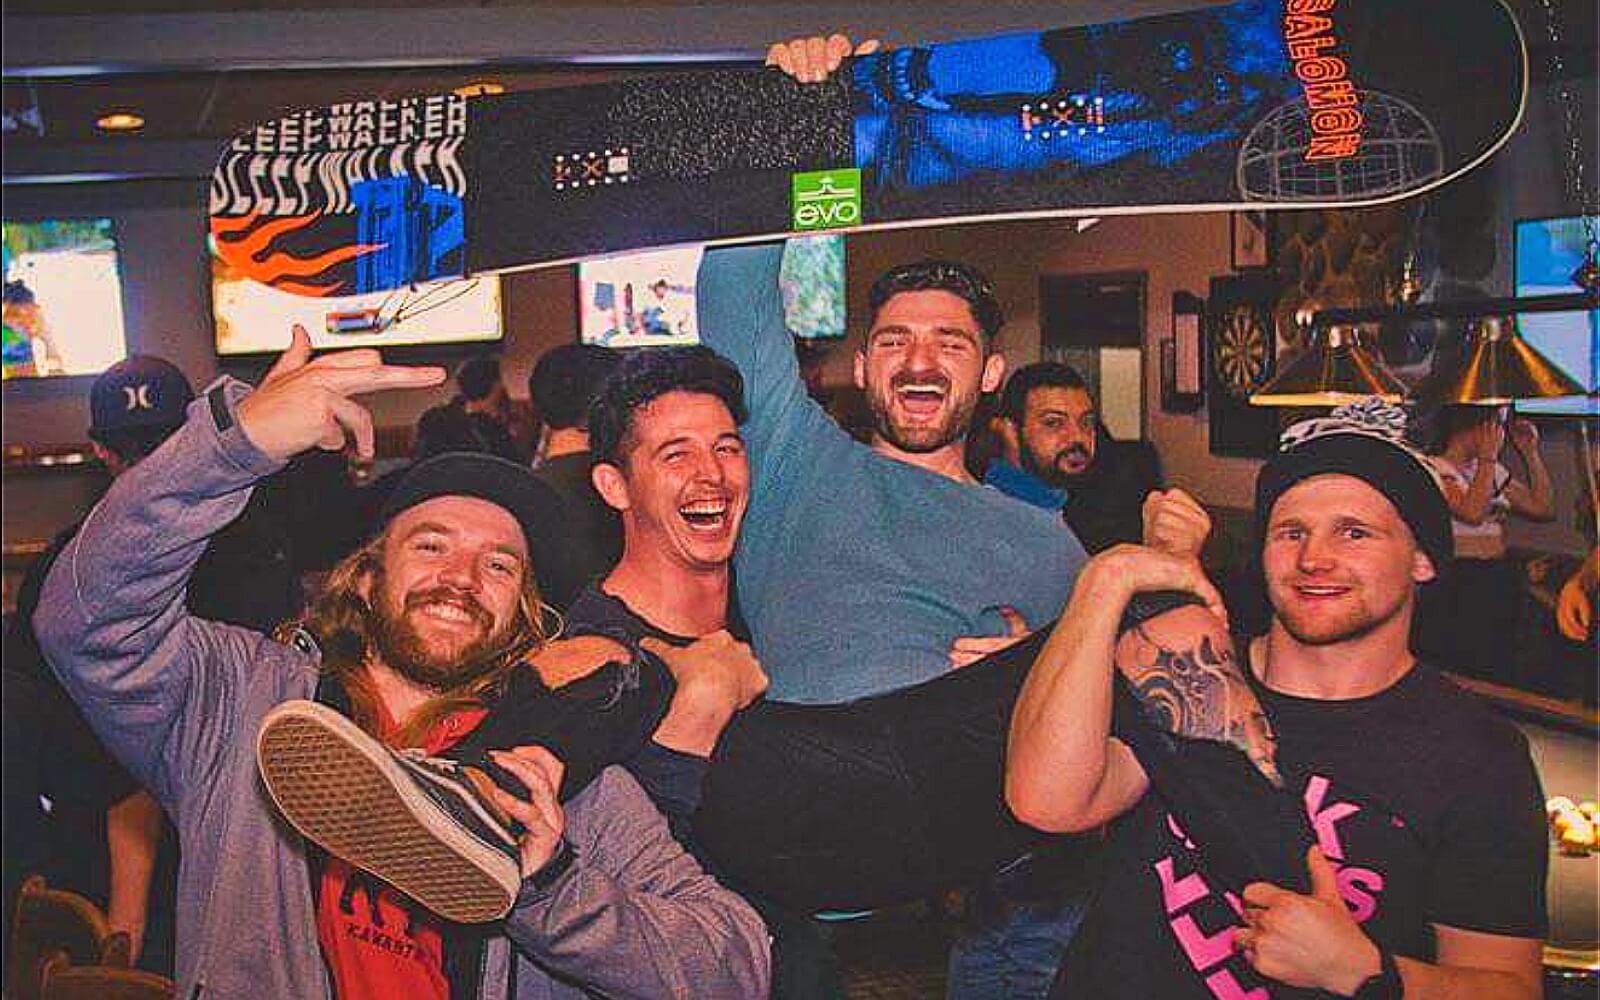 A group of men celebrate winning a snowboard, Crystal Lounge Whistler